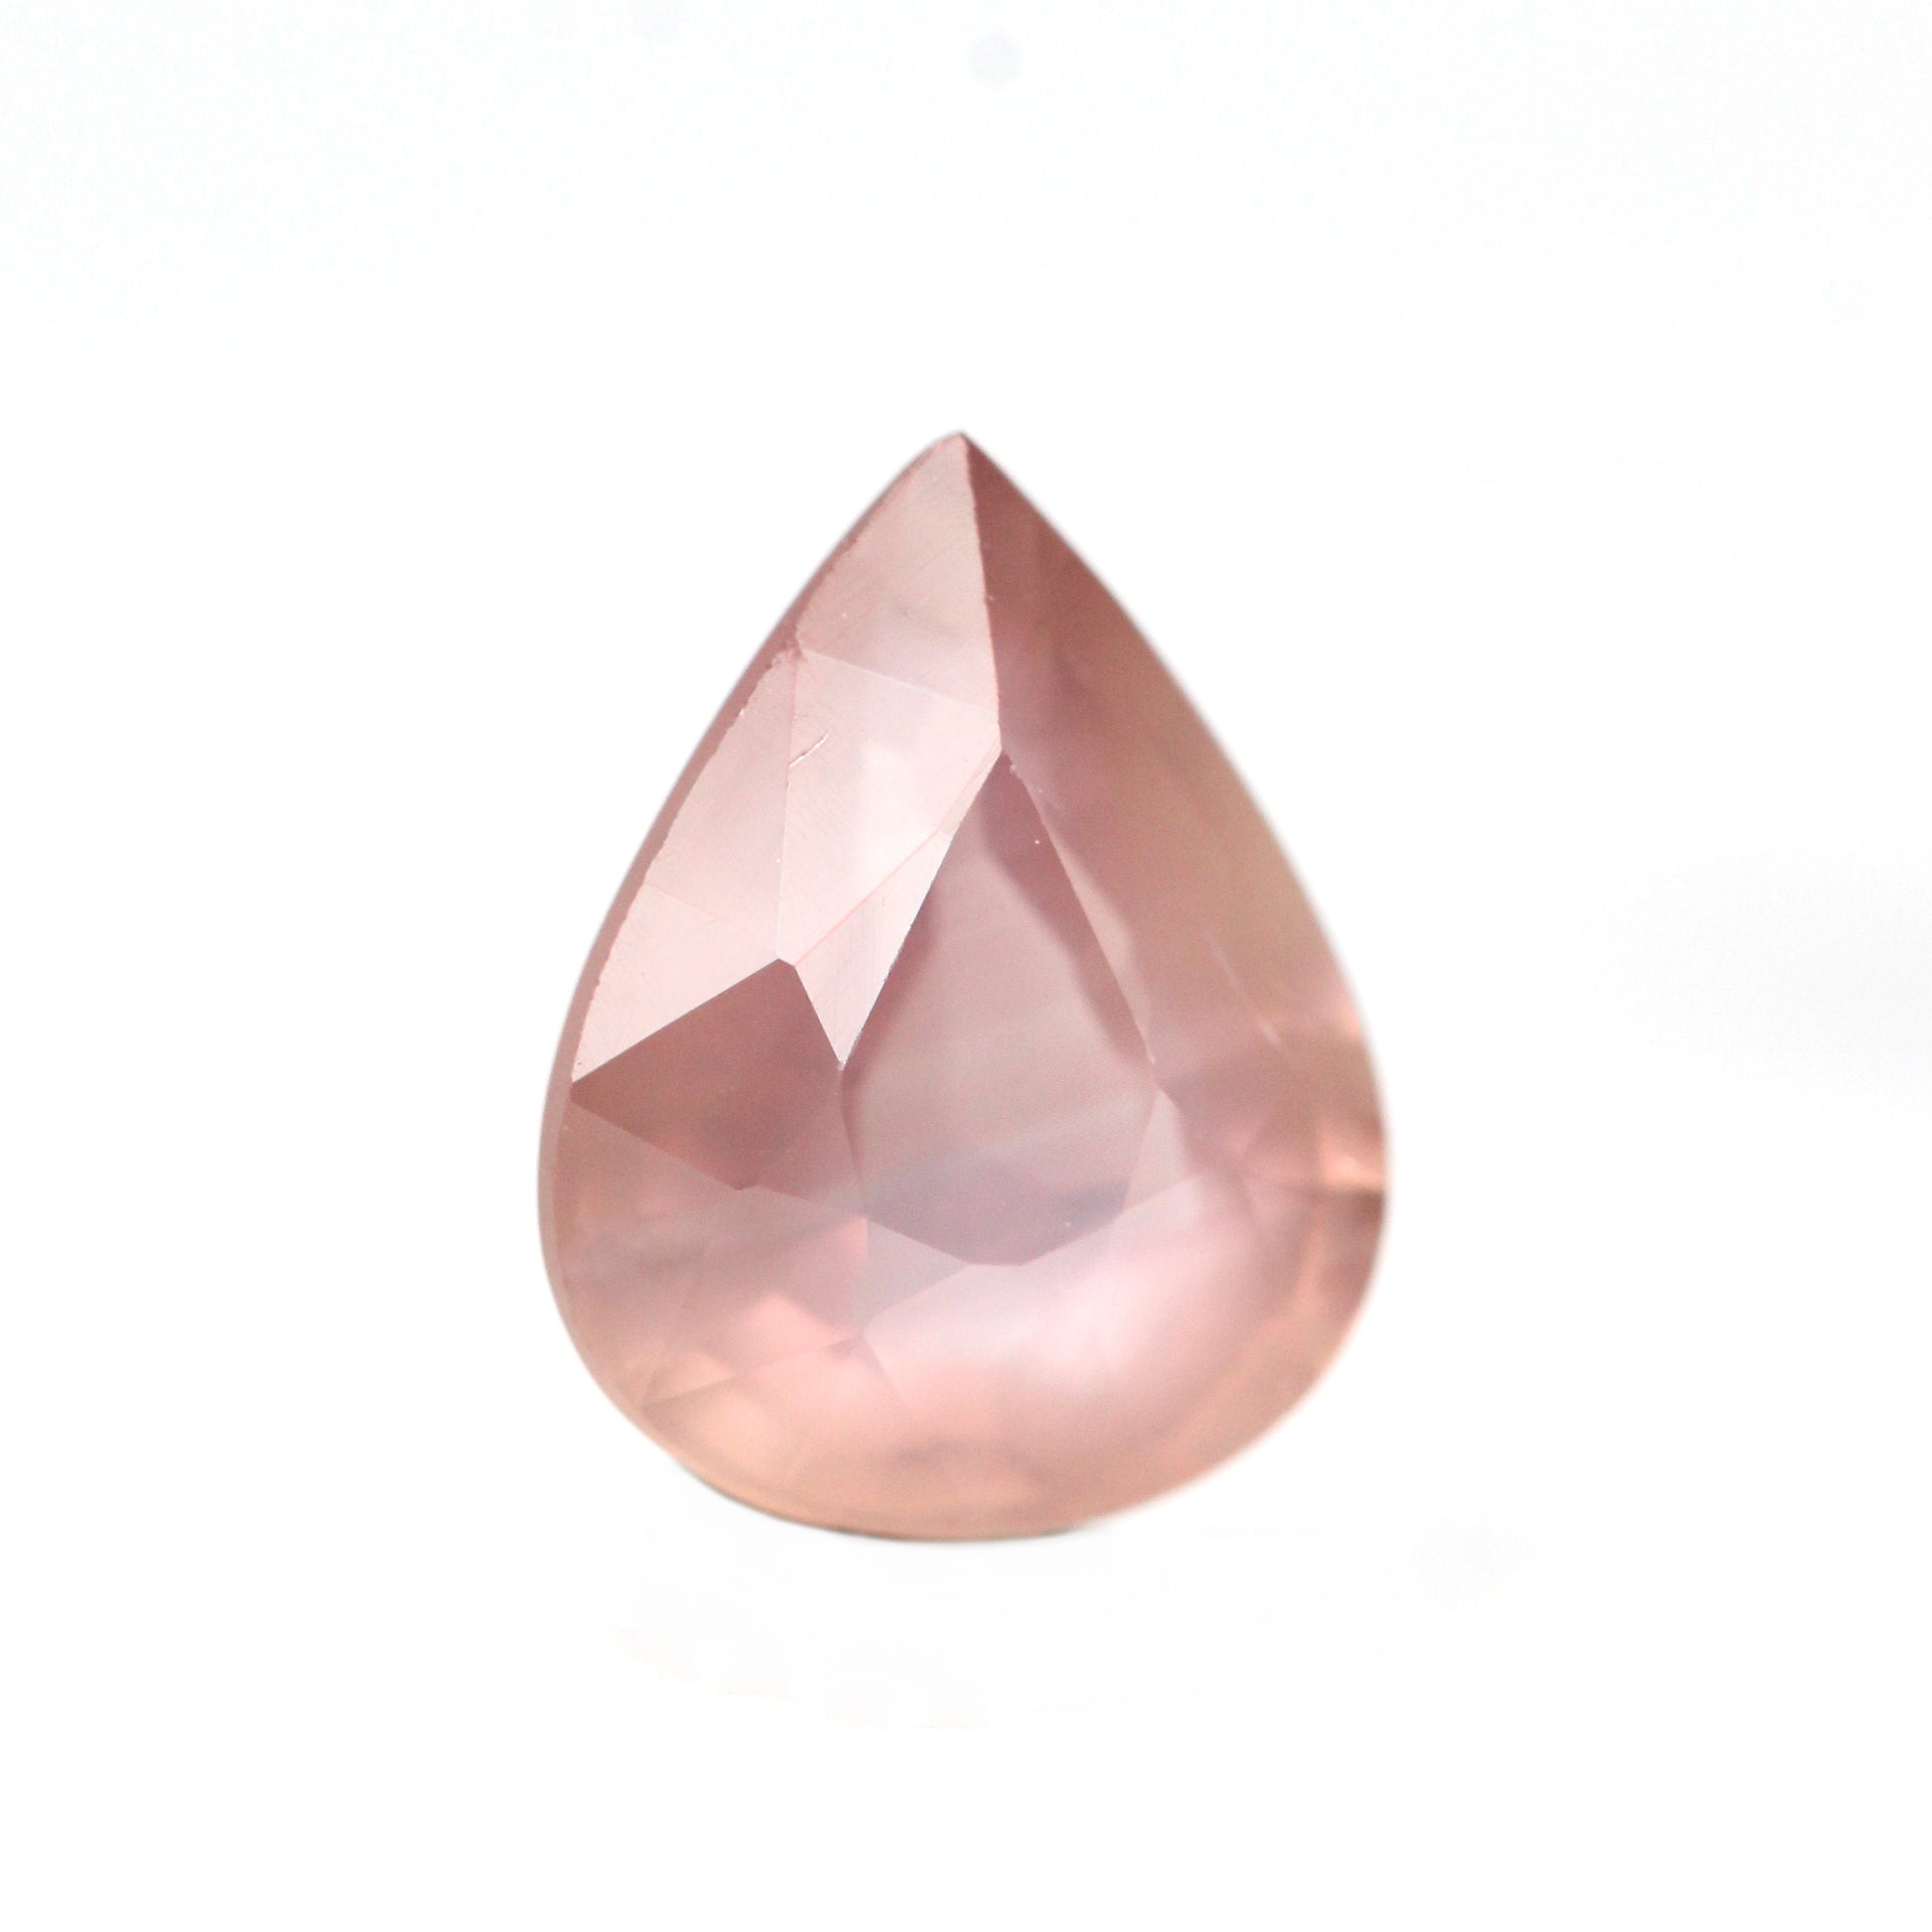 1.44 Carat Opalescent Peach Pear Sapphire for Custom Work - Inventory Code PPS144 - Midwinter Co. Alternative Bridal Rings and Modern Fine Jewelry